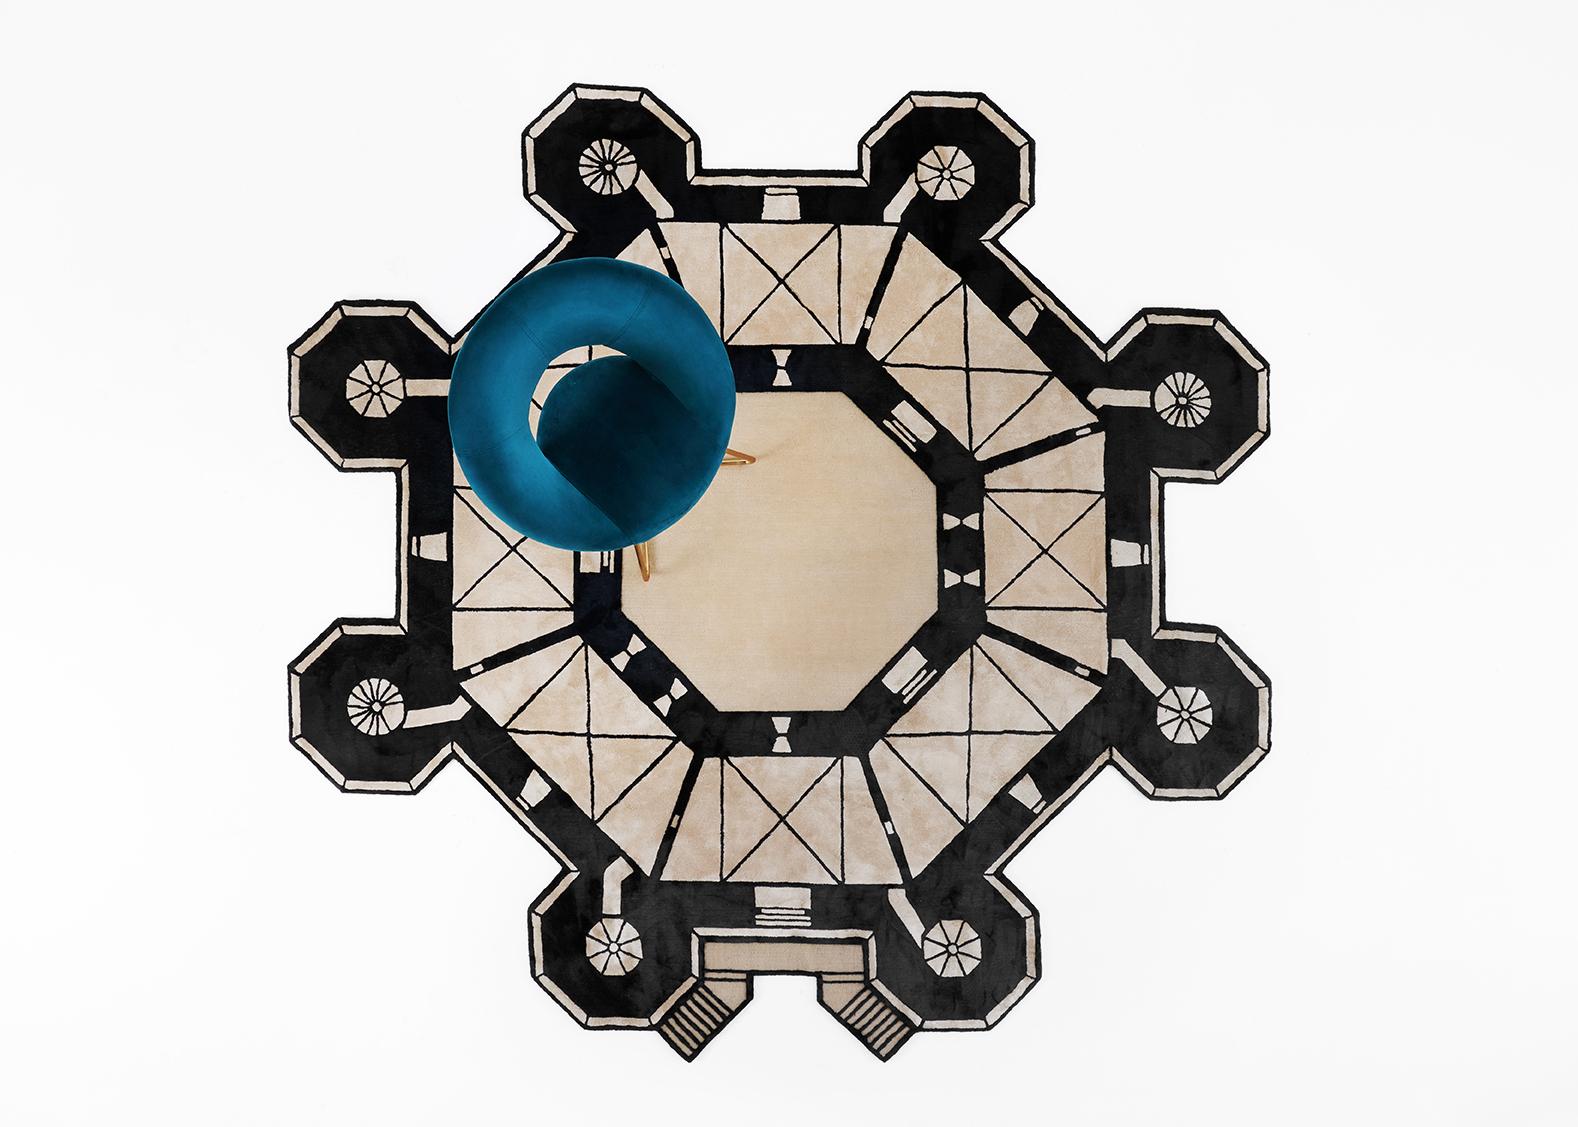 Take a gentle step on a rug from new Monumenti collection and feel the everlasting and unforgettable connection between the past and the future, hidden in the blueprints of an ancient dwelling. The refined forms of the pattern woven into the web of